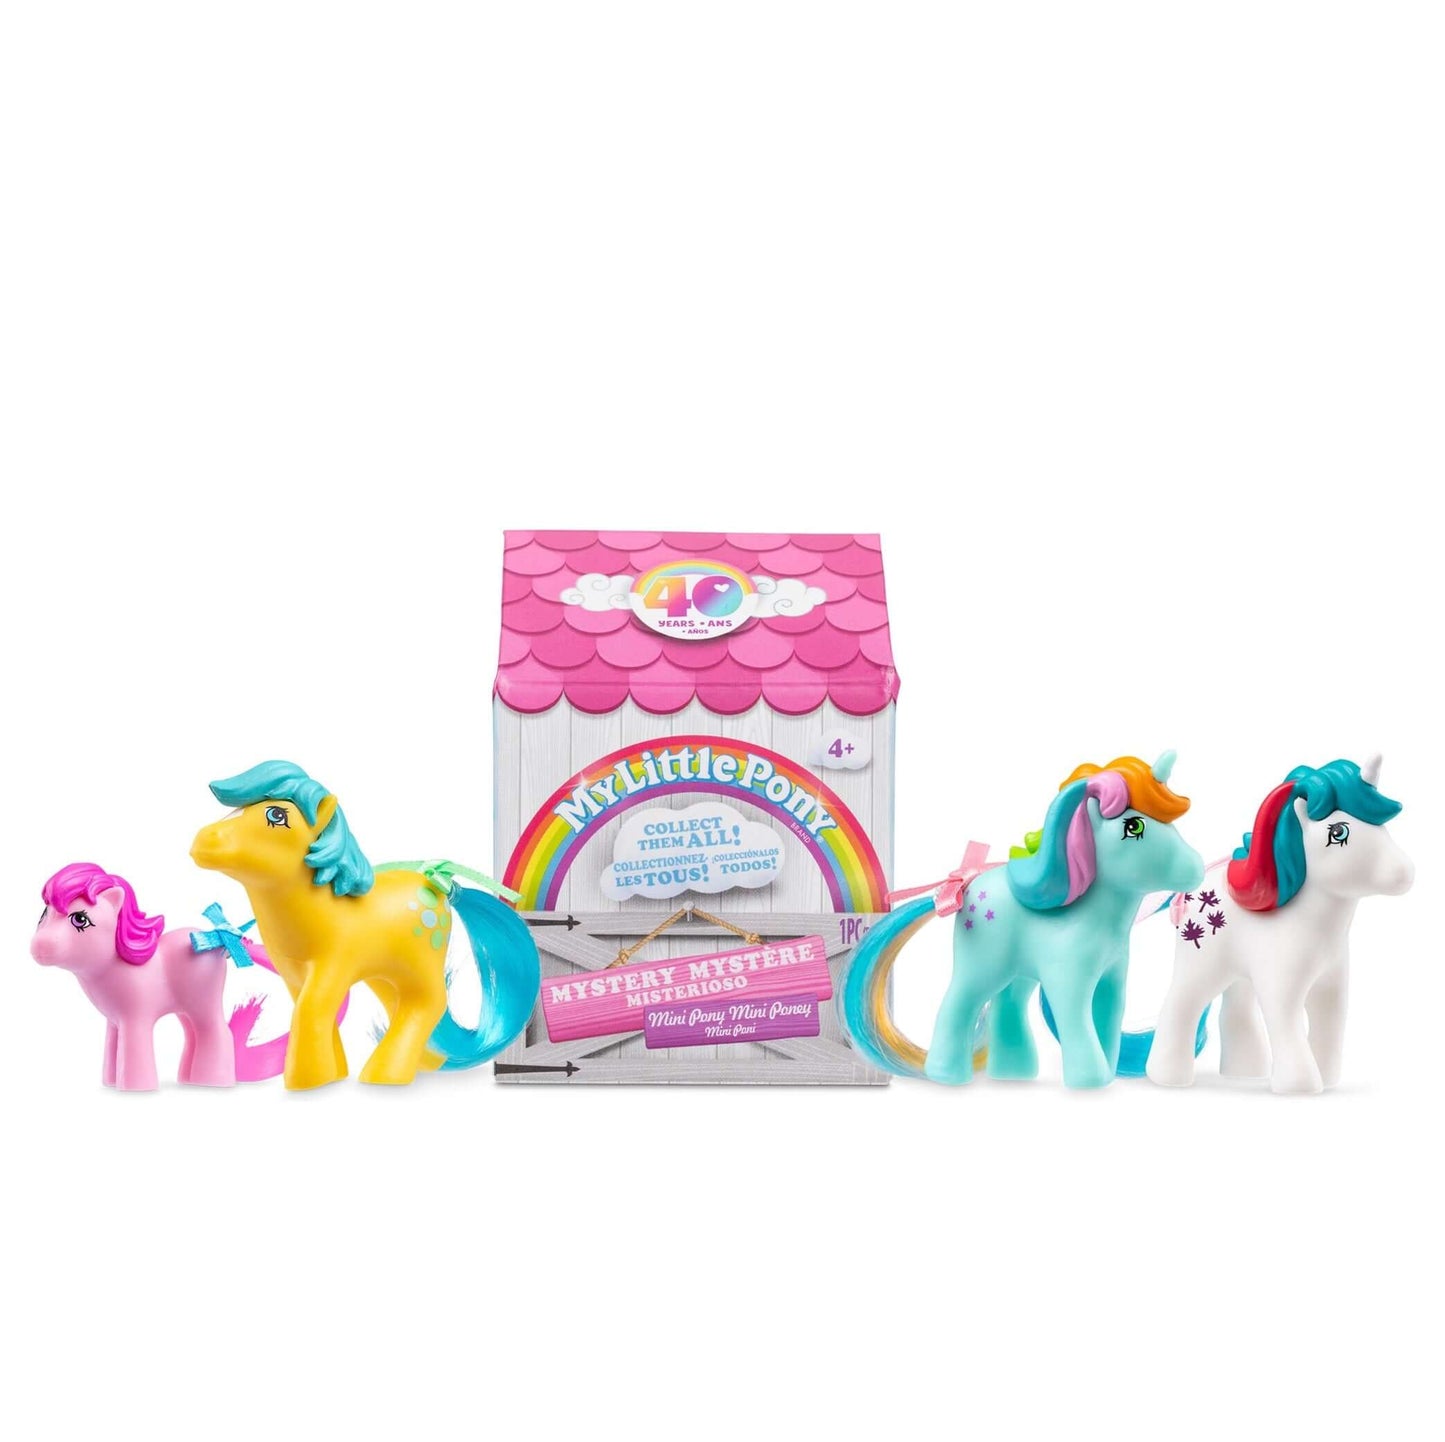 40th Anniversary My Little Pony Mystery Minis